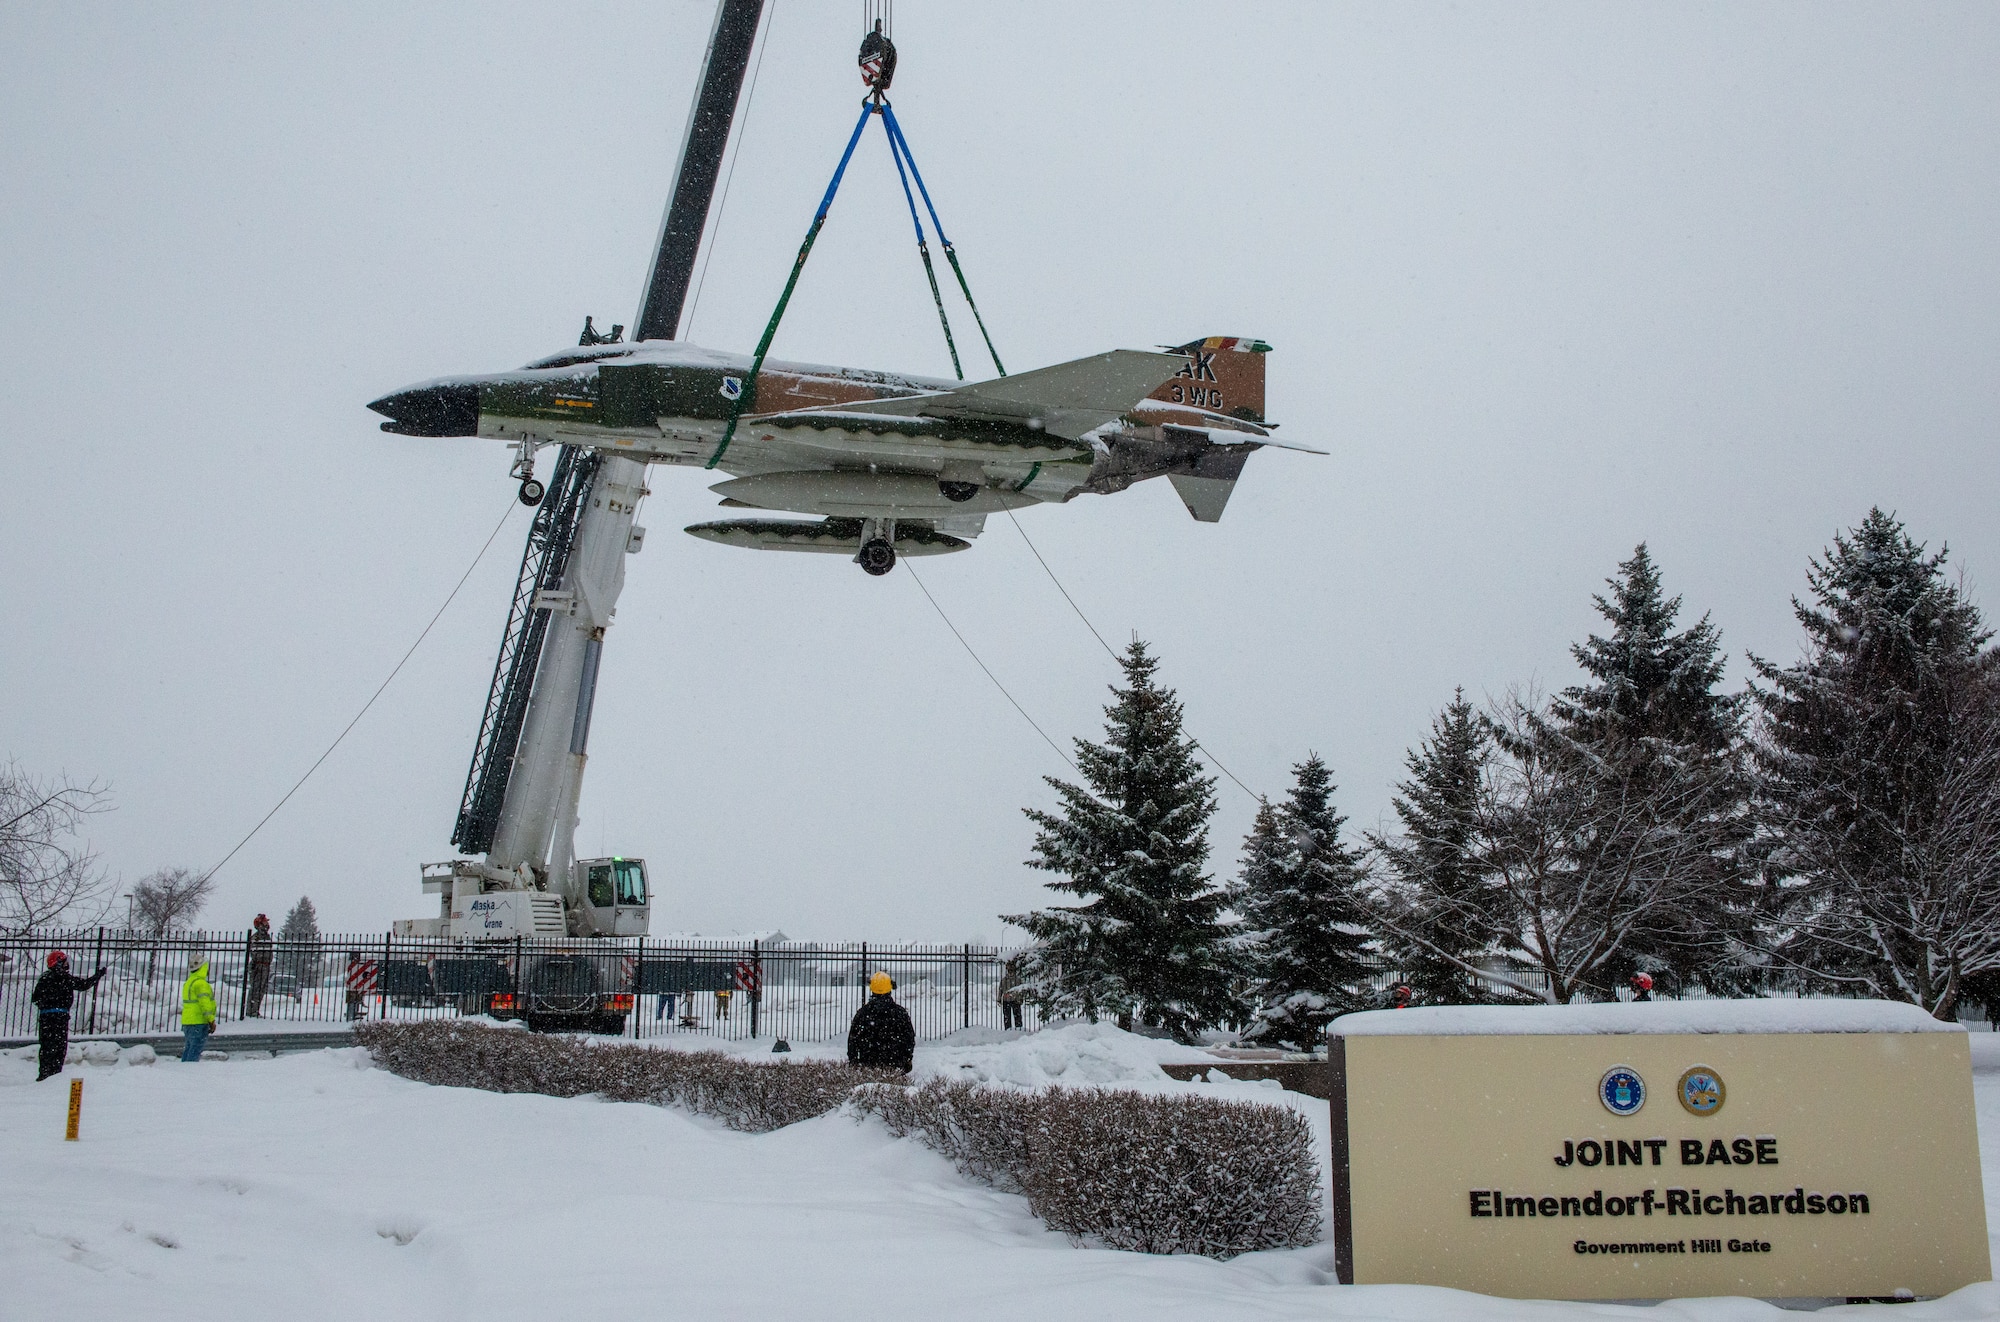 Members from the 3rd Maintenance Squadron assigned to the 3rd Wing, and Alaska Crane civilian contractors hoist the McDonnell F-4C Phantom II static display in front of the Government Hill Gate at Joint Base Elmendorf-Richardson, Alaska, Feb 18, 2021.